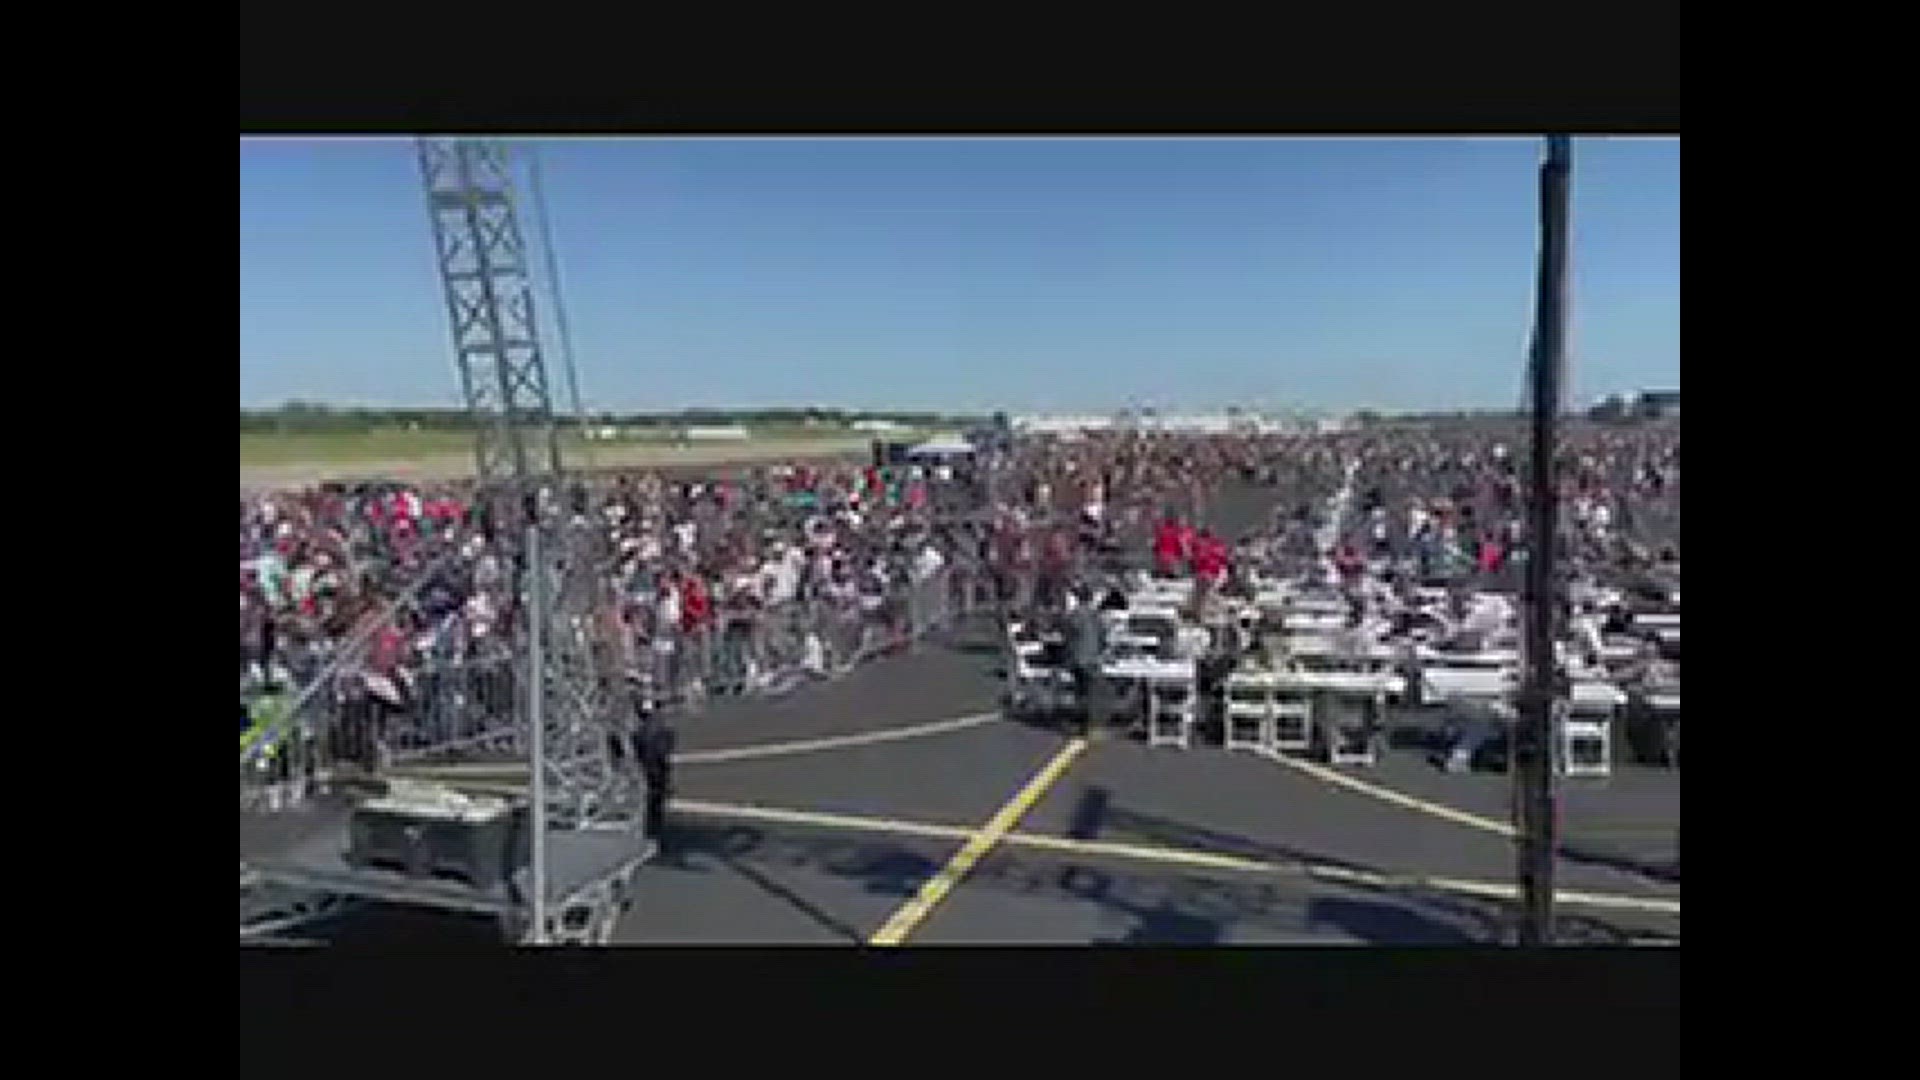 View of the thousands gathered at the Waco airport
Credit: KCEN